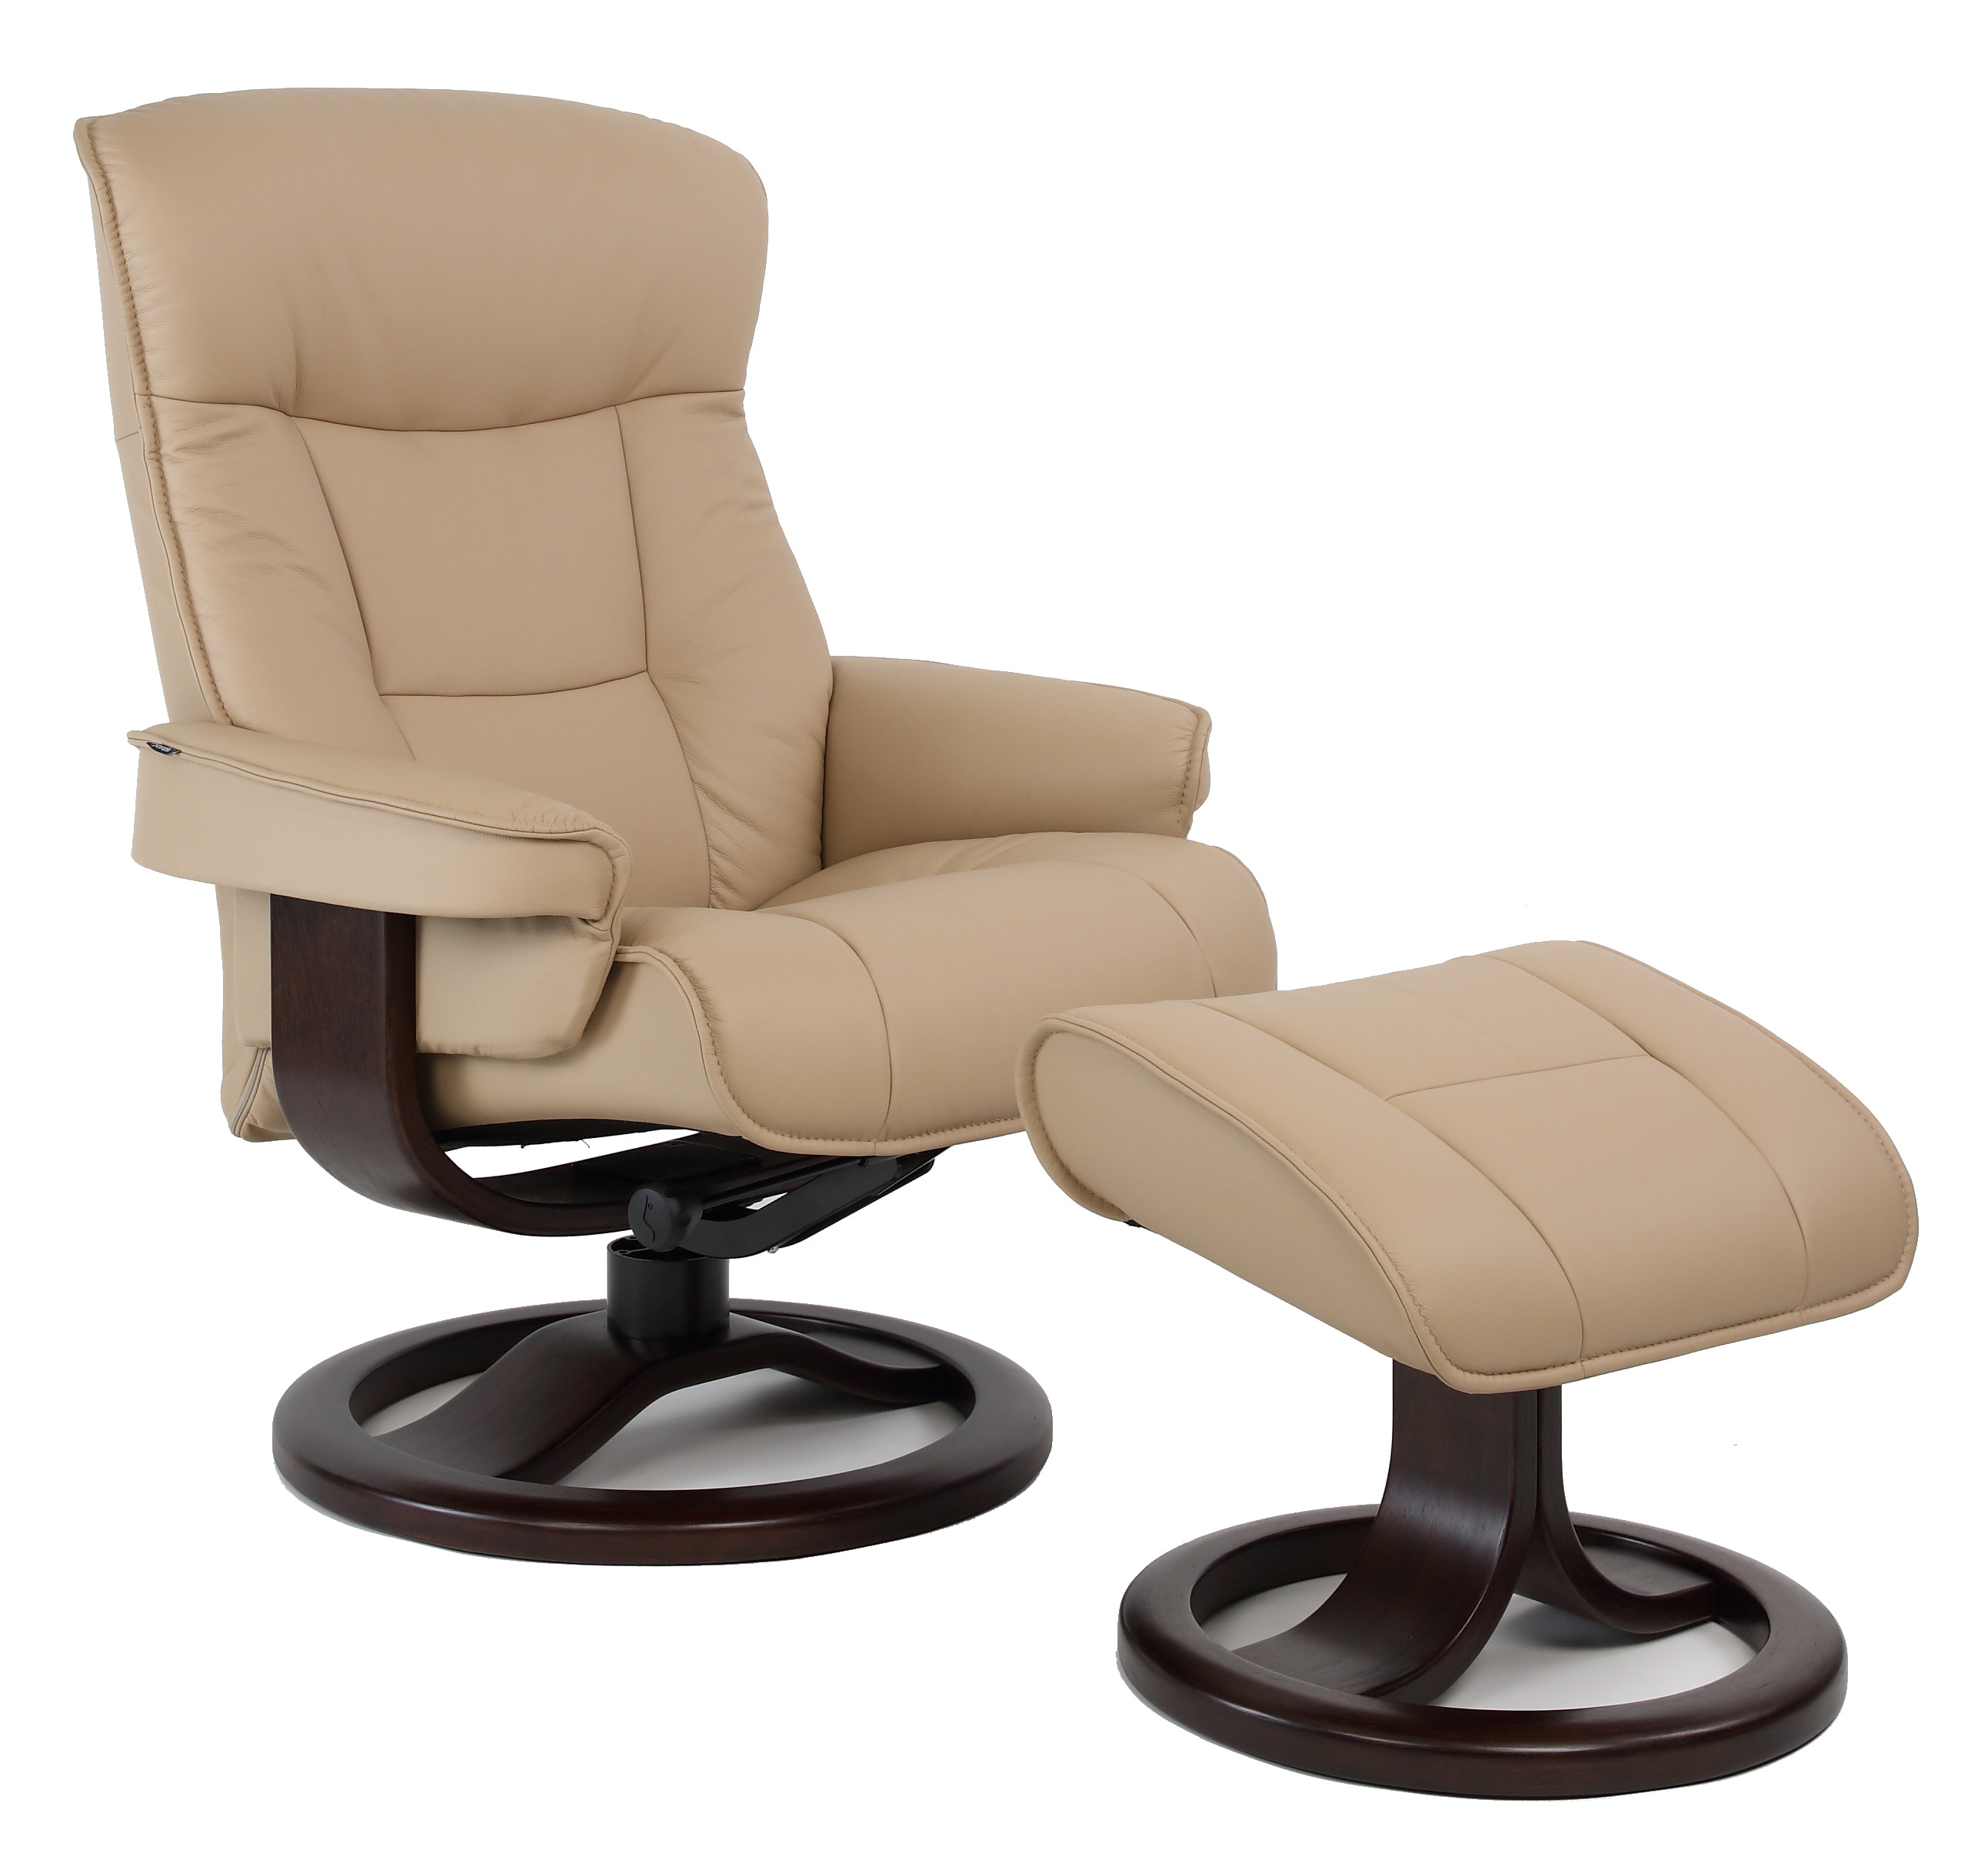 Bergen R Small Recliner with Footstool Manual